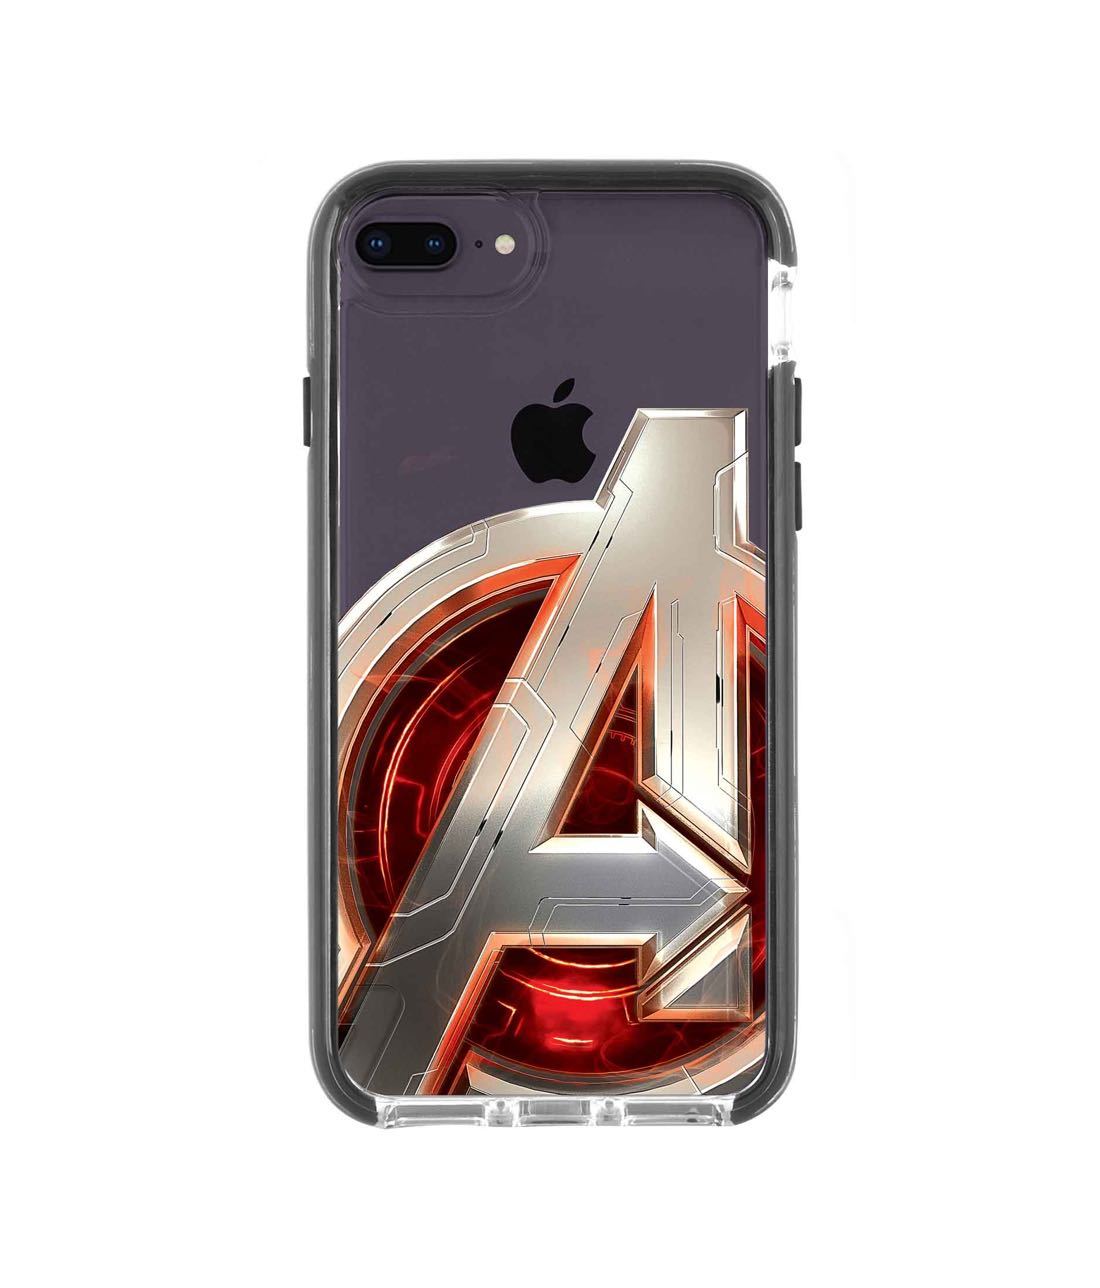 Avengers Version 2 - Extreme Phone Case for iPhone 8 Plus